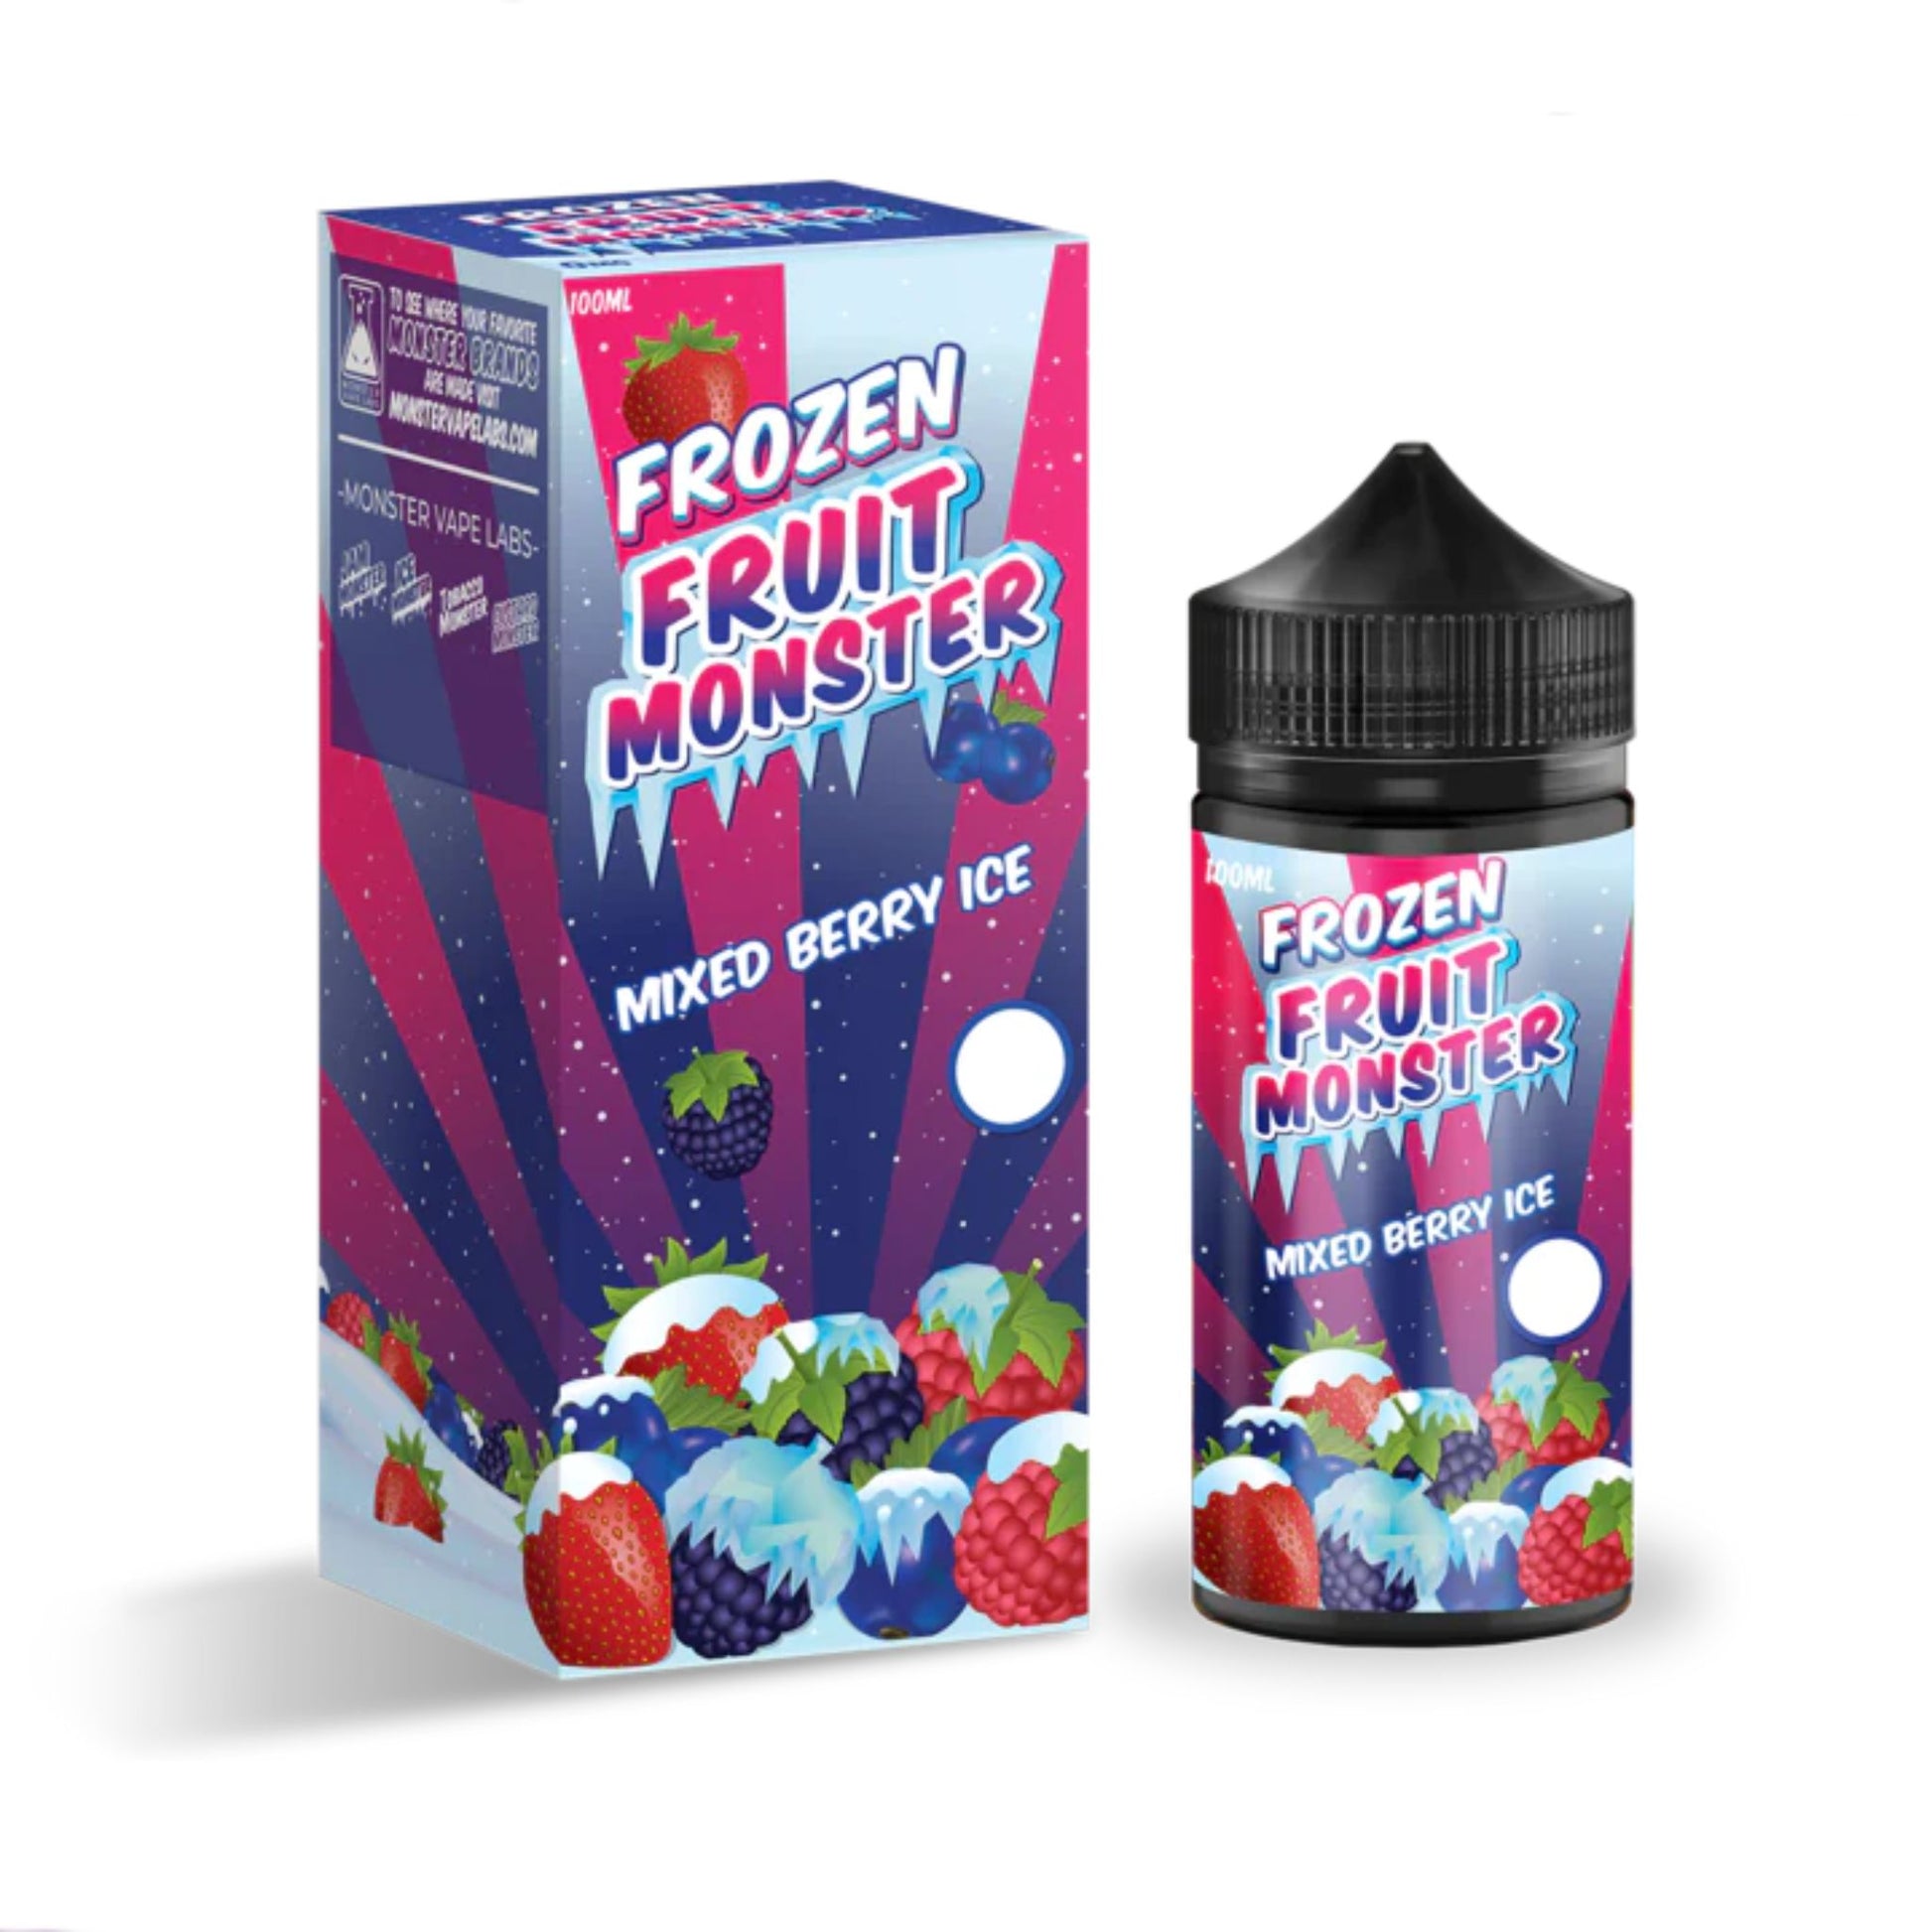 Frozen Fruit Monster | Mixed Berry Ice 100ml bottle and box